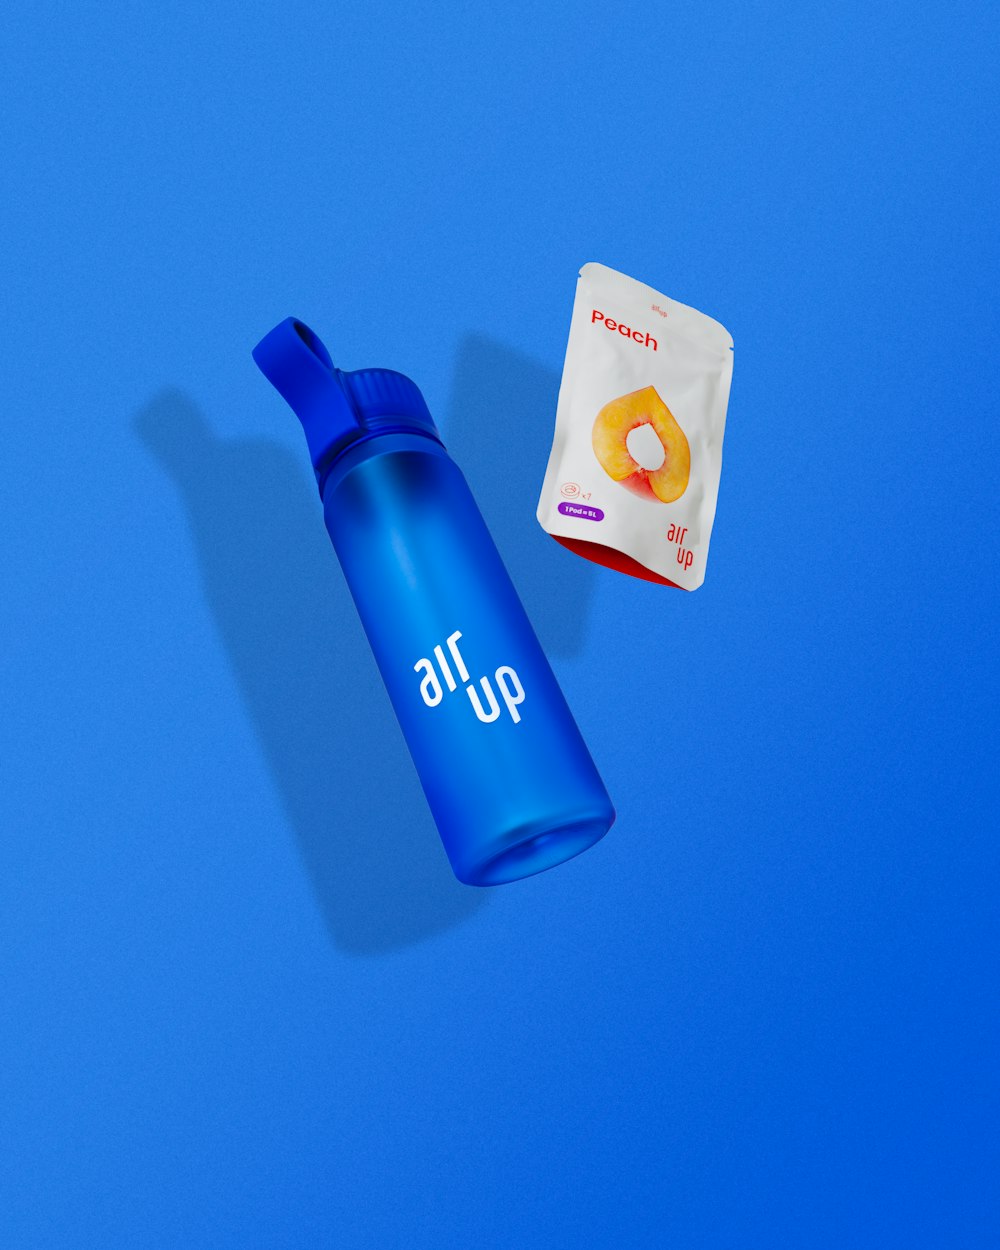 a blue bottle and a bag of chips on a blue background